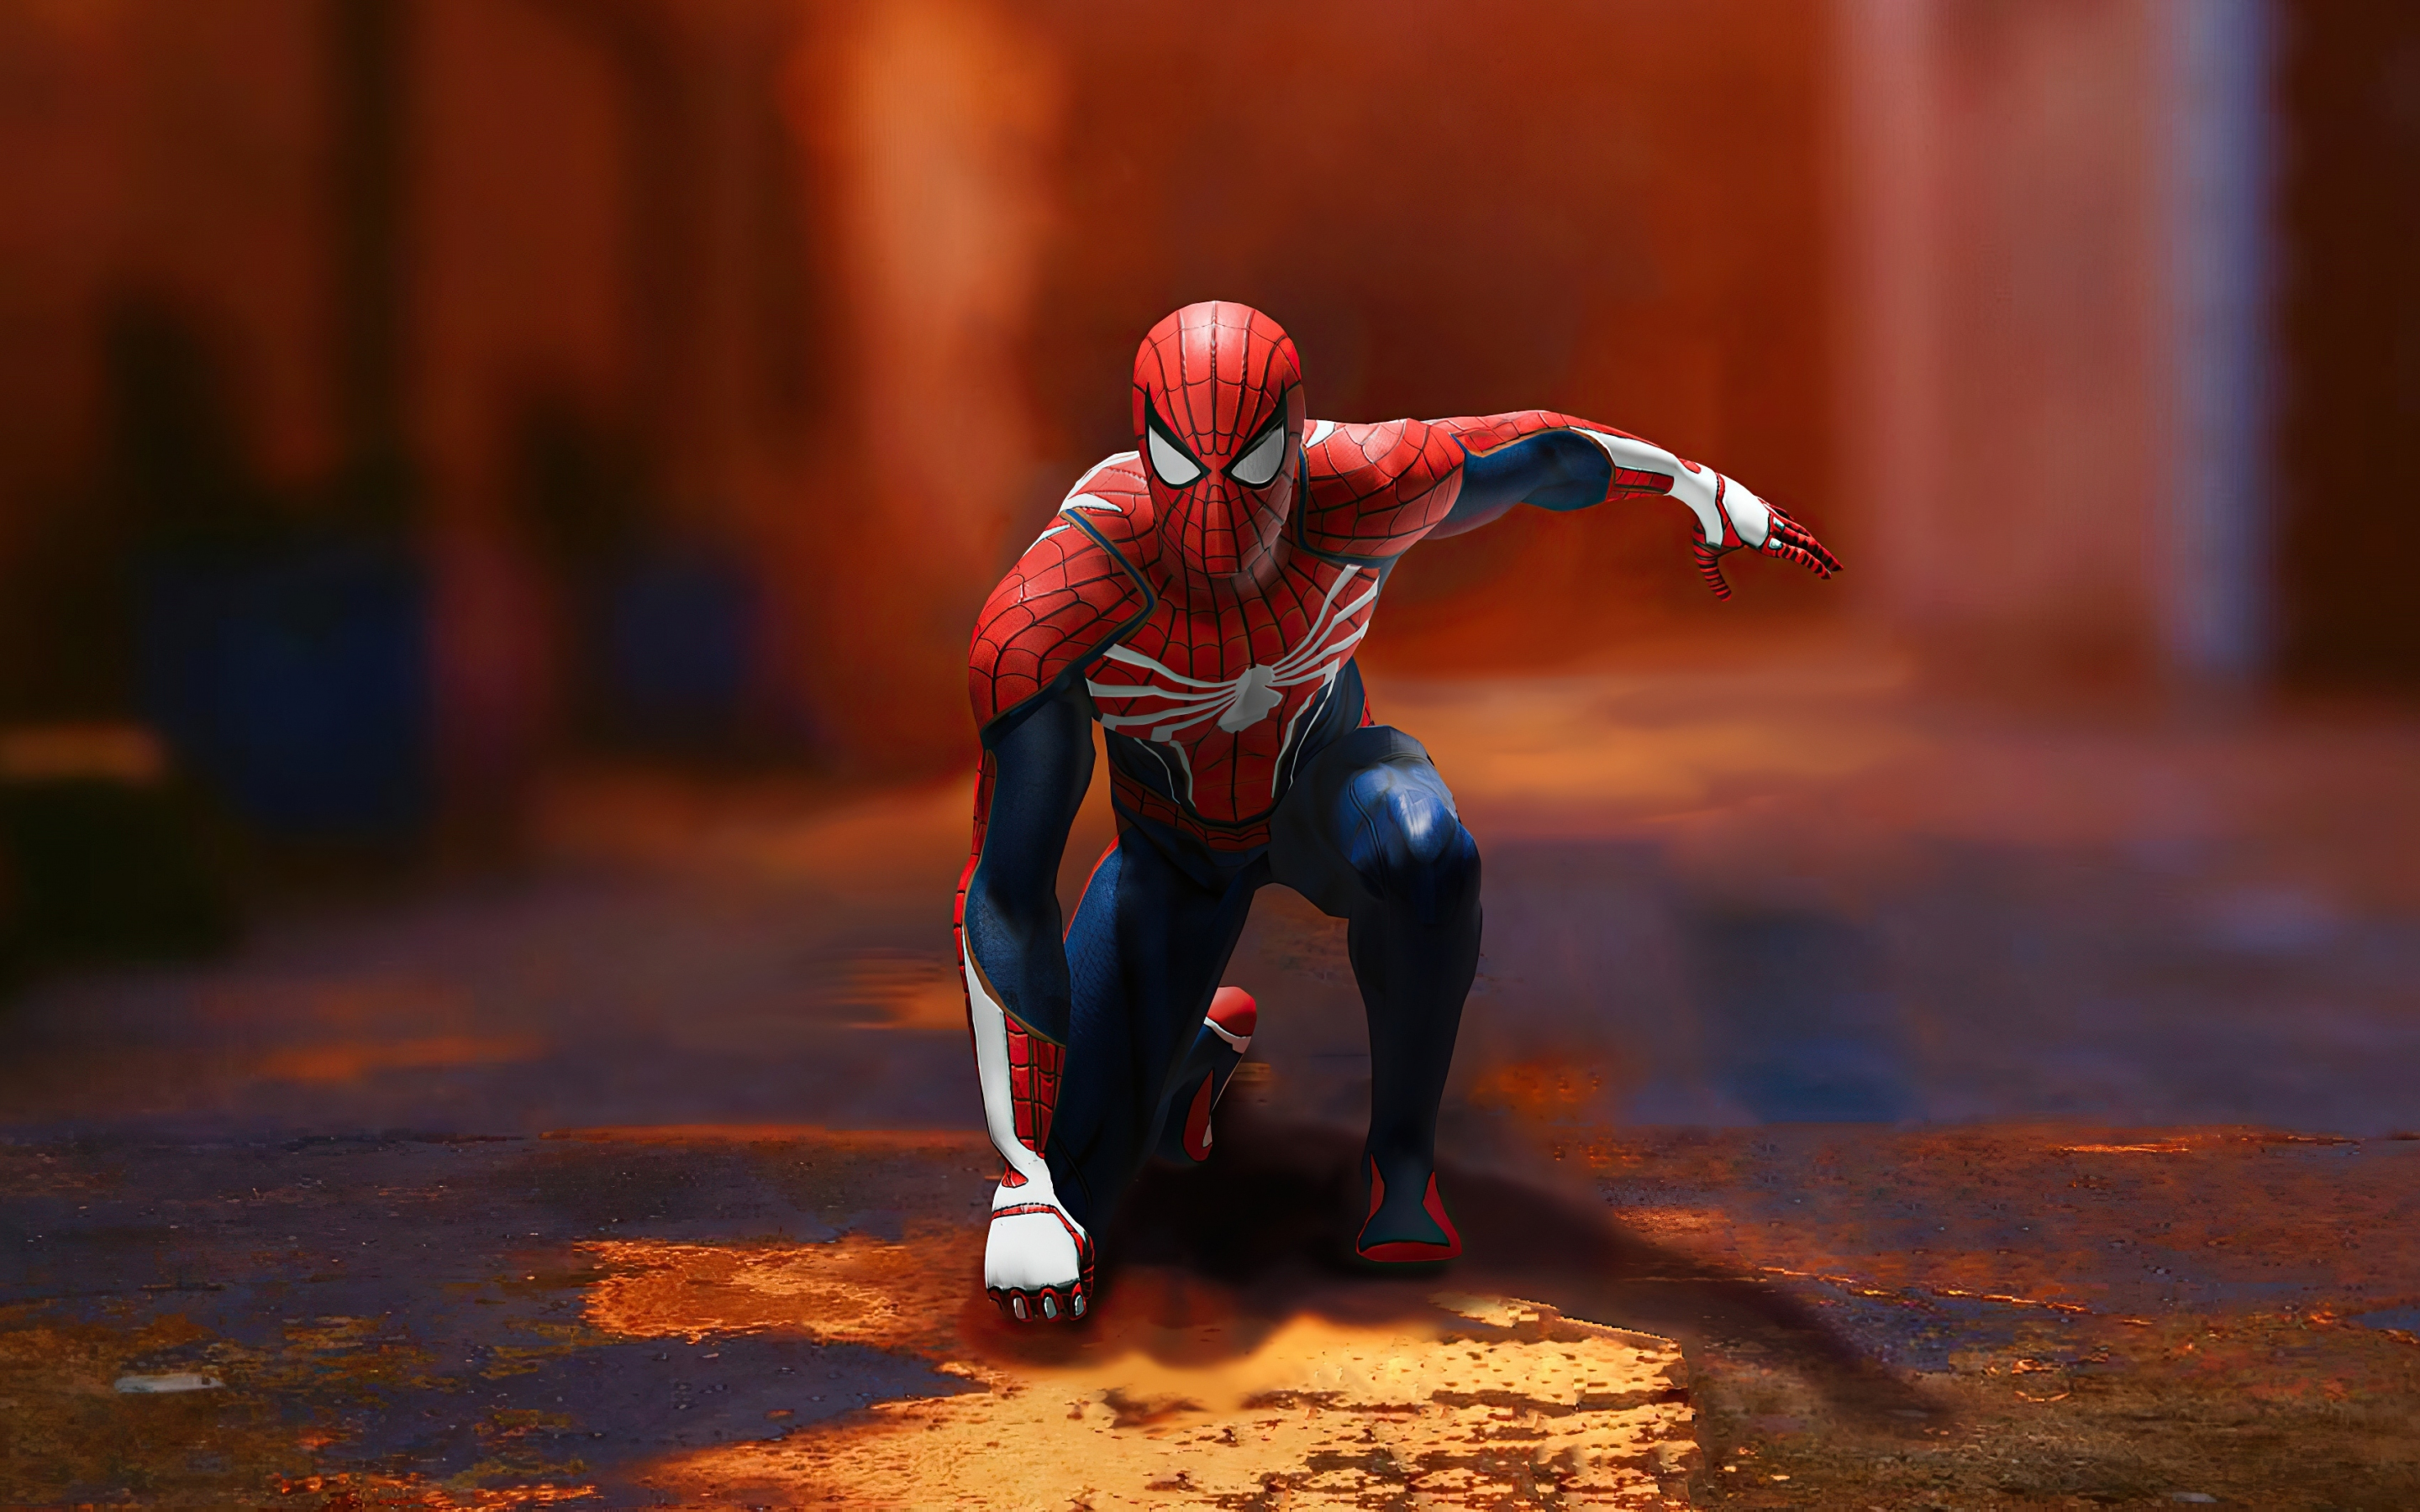 Spider-man, ready for jump, game art, 2880x1800 wallpaper